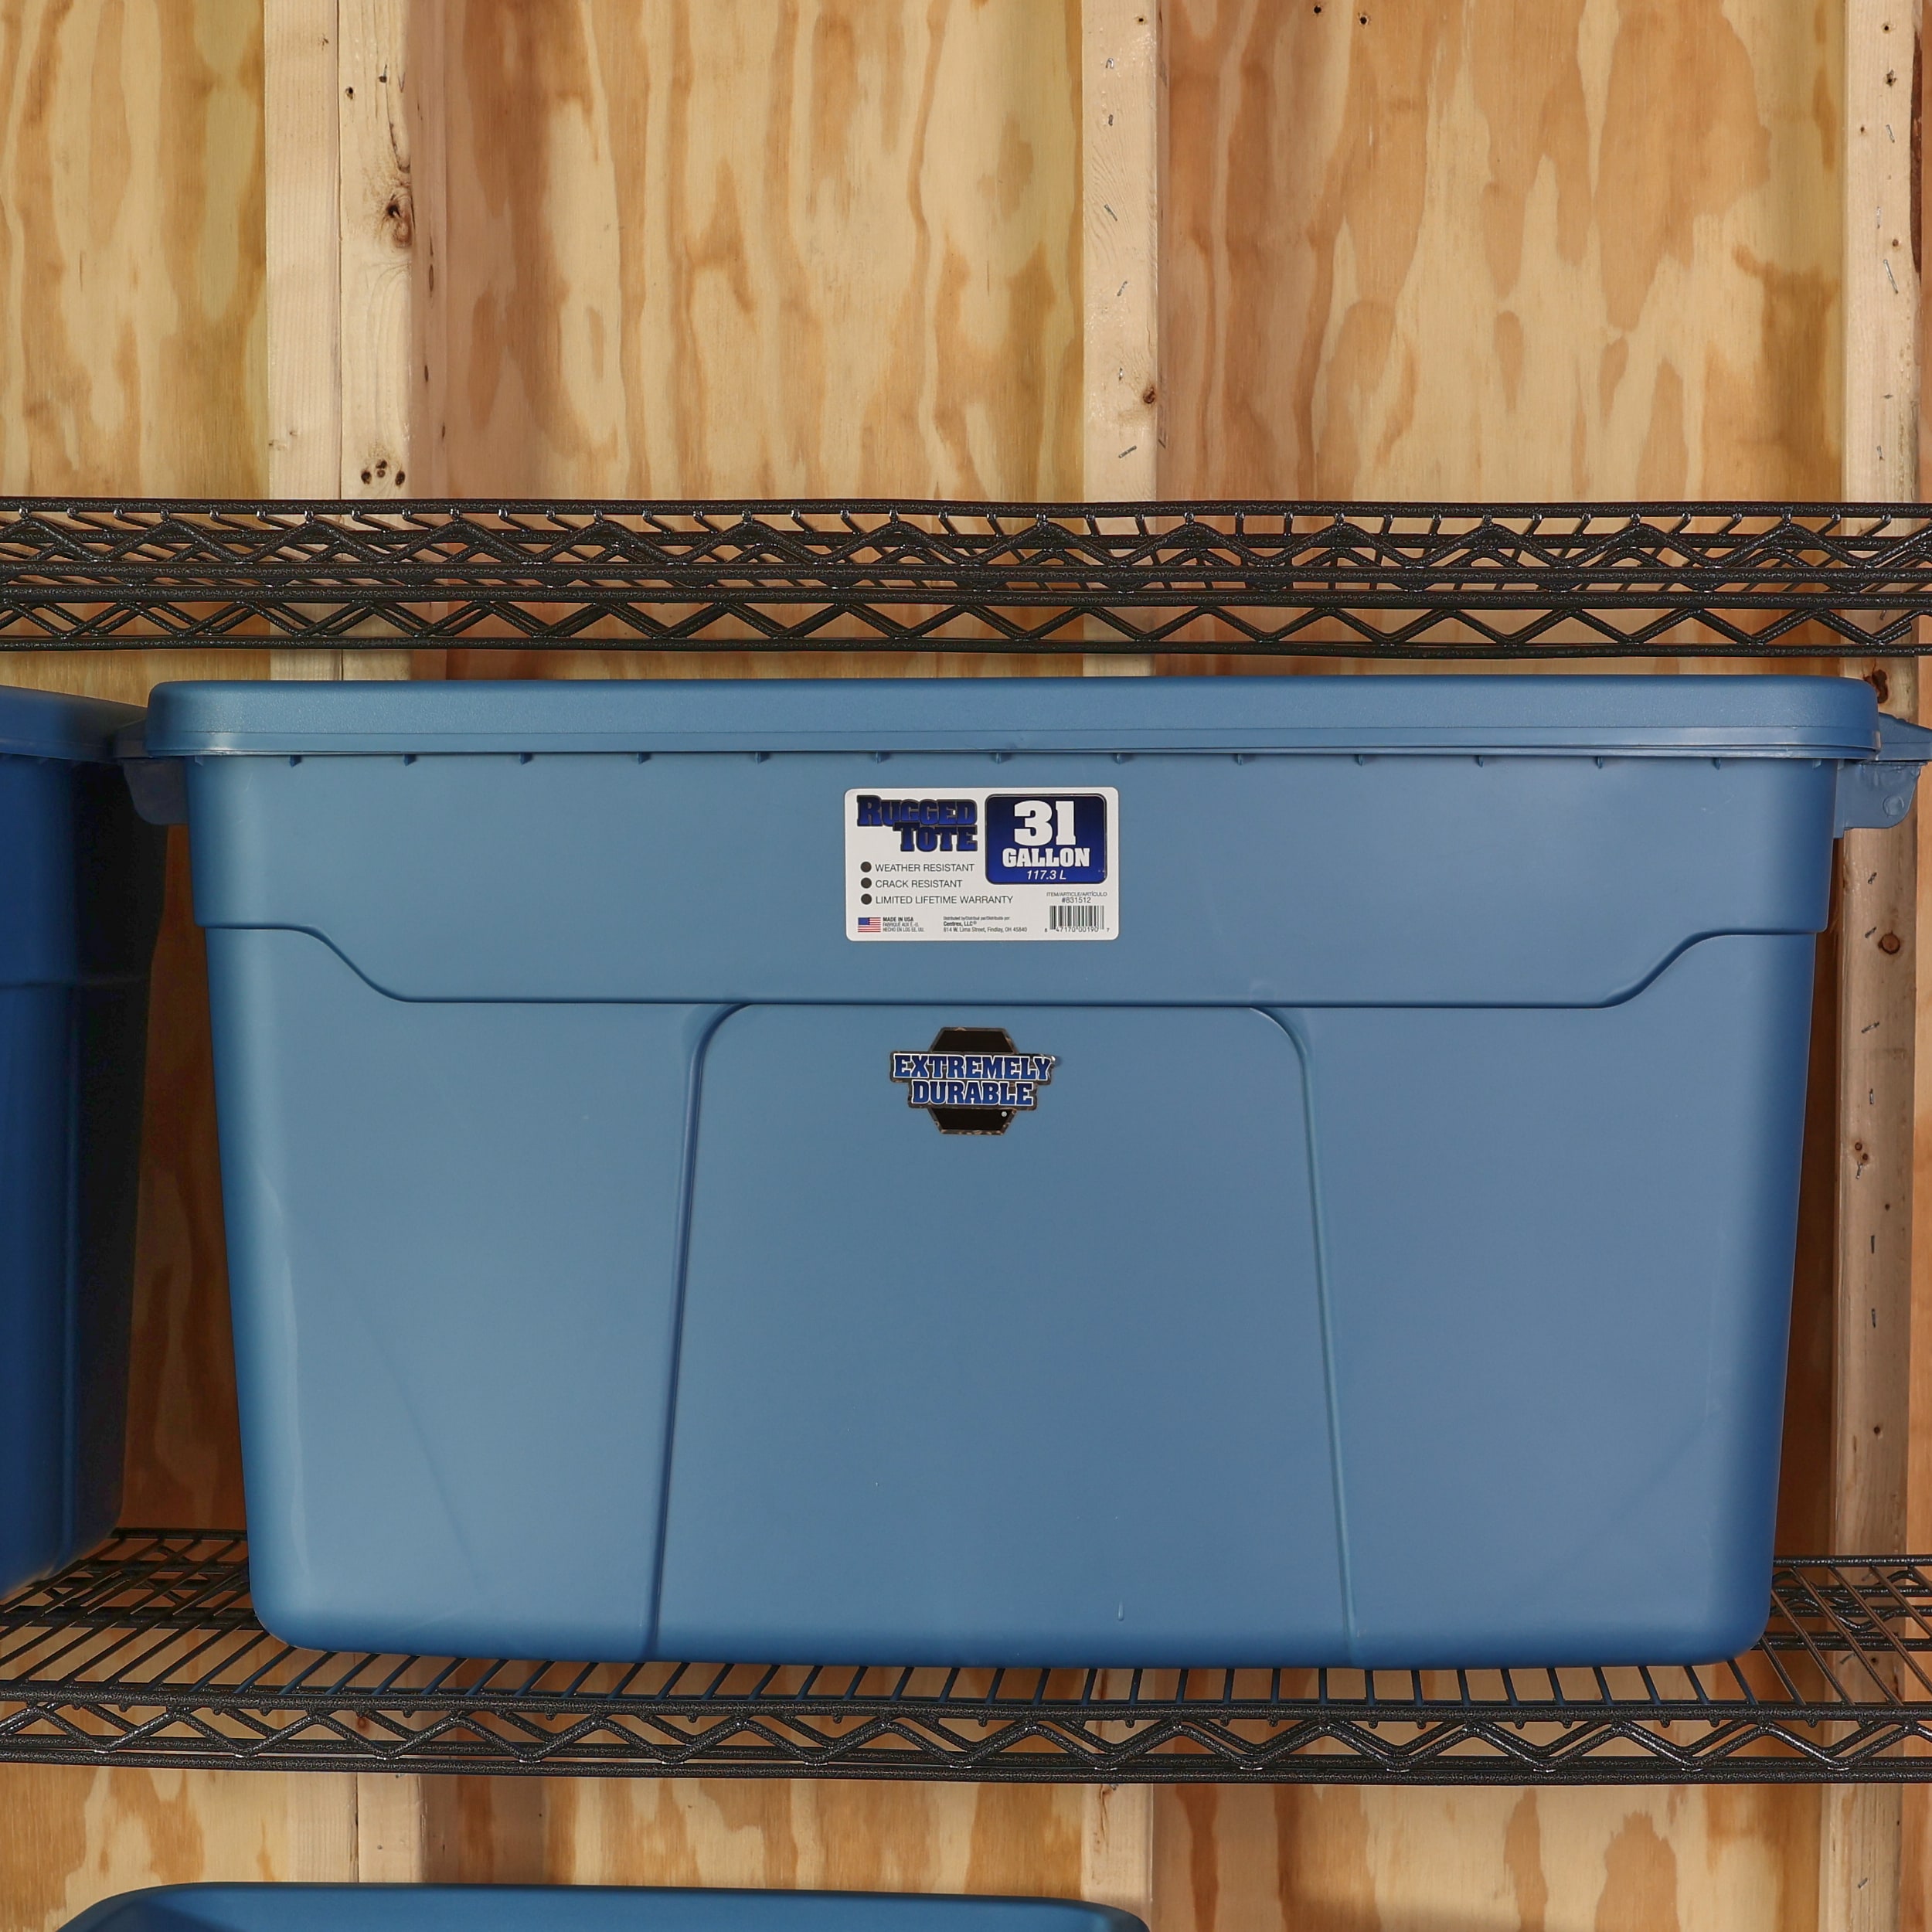 Centrex Plastics, LLC Plastic Storage Tote 831512 Rugged Tote 31-Gallon Blue Tote with Standard Snap Lid - Lowe's